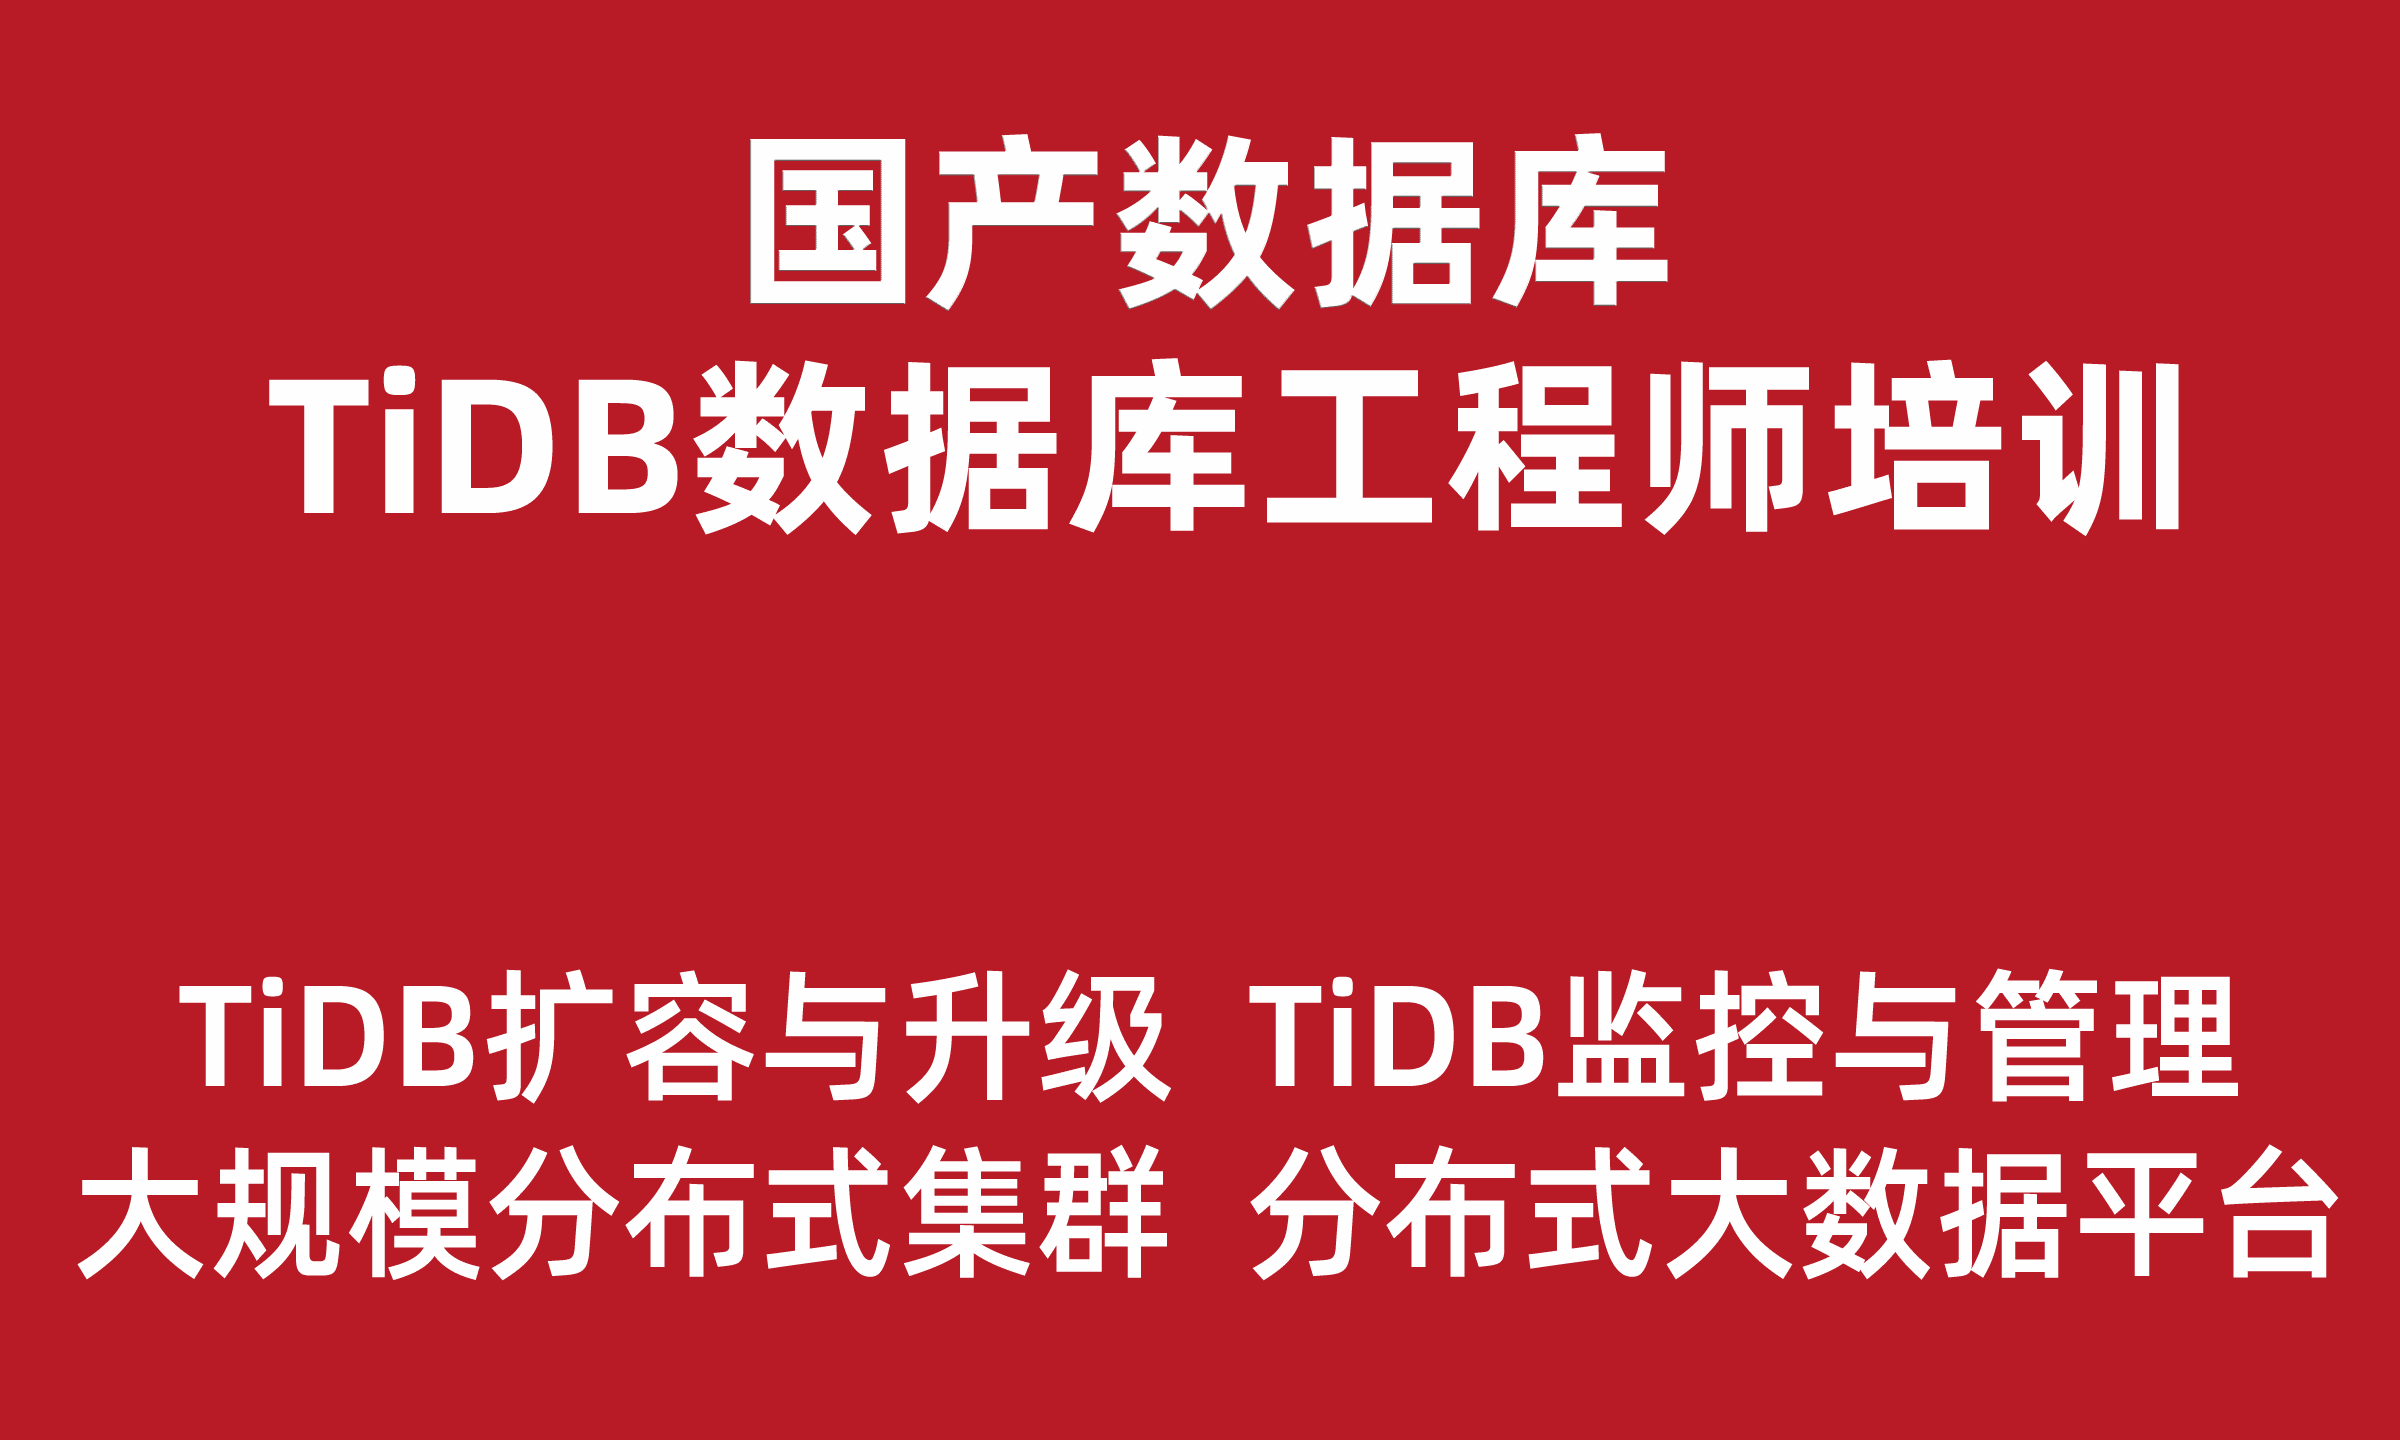  Practical training course for TiDB distributed database engineers (PB level big data platform, large-scale distributed cluster architecture)